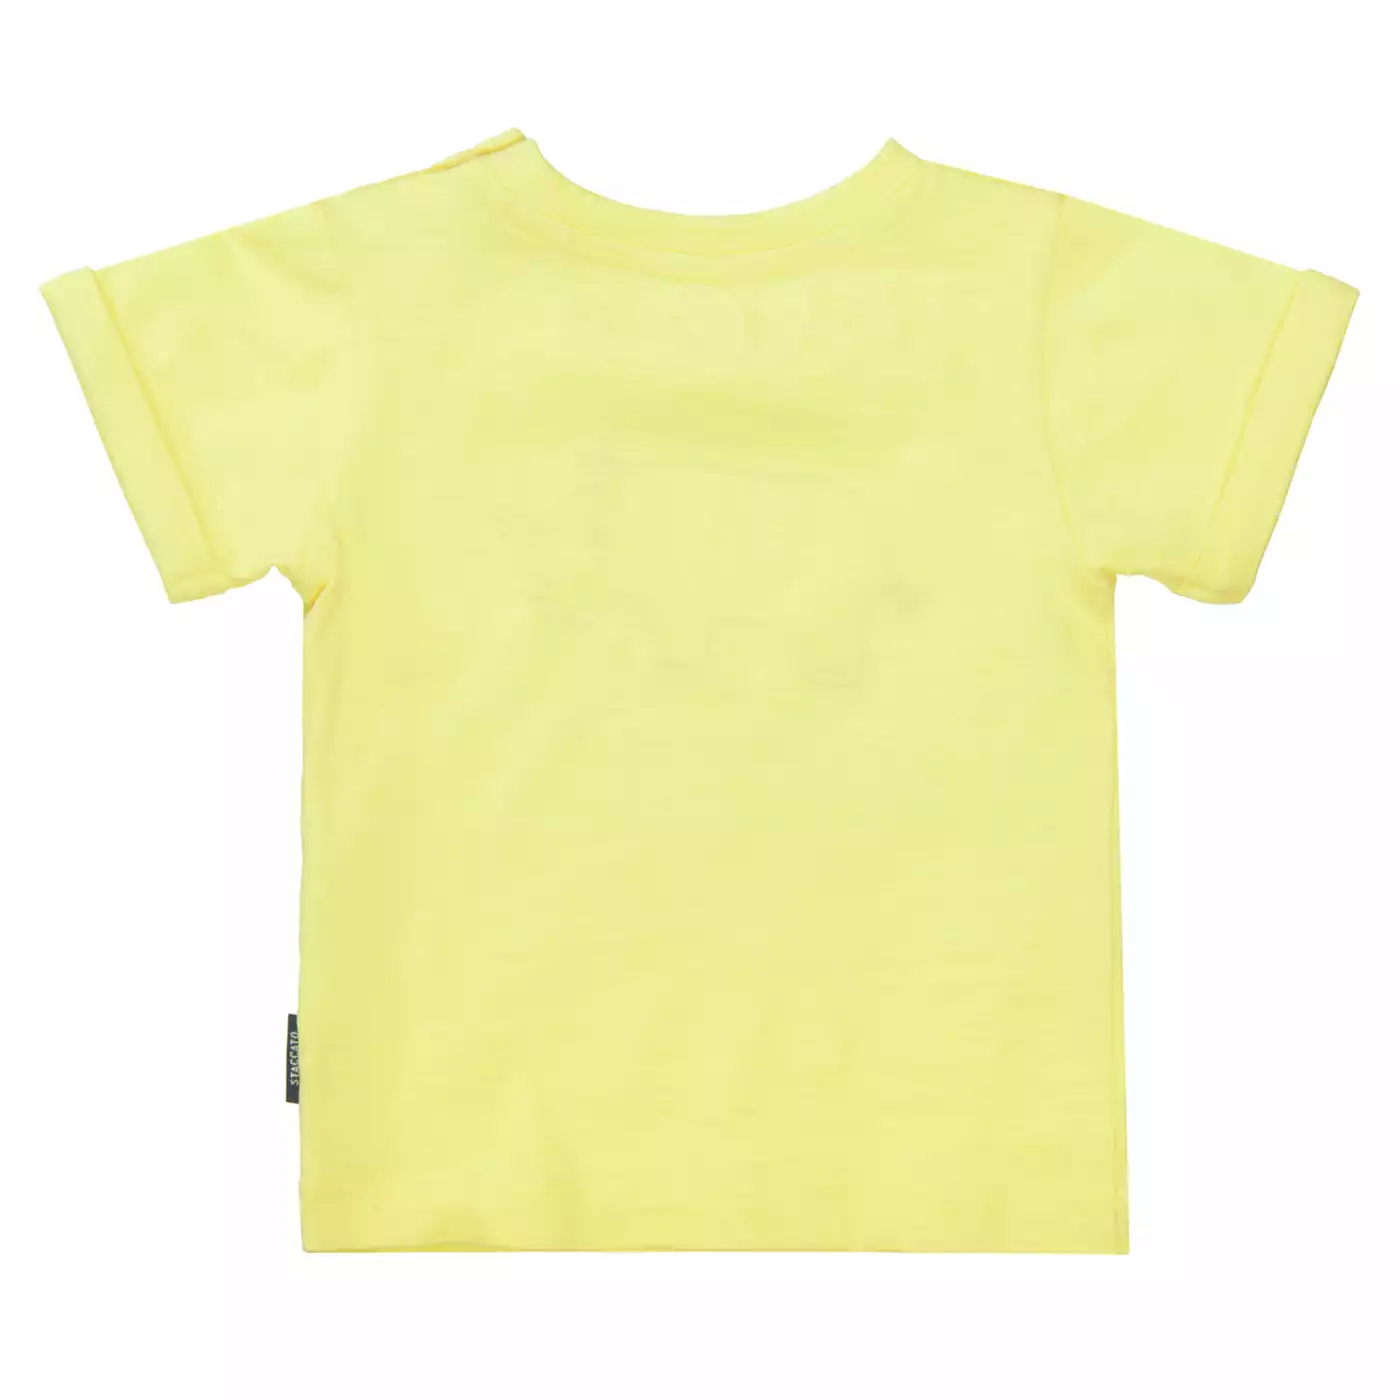 T-Shirt Nashorn STACCATO Gelb M2006580299603 4